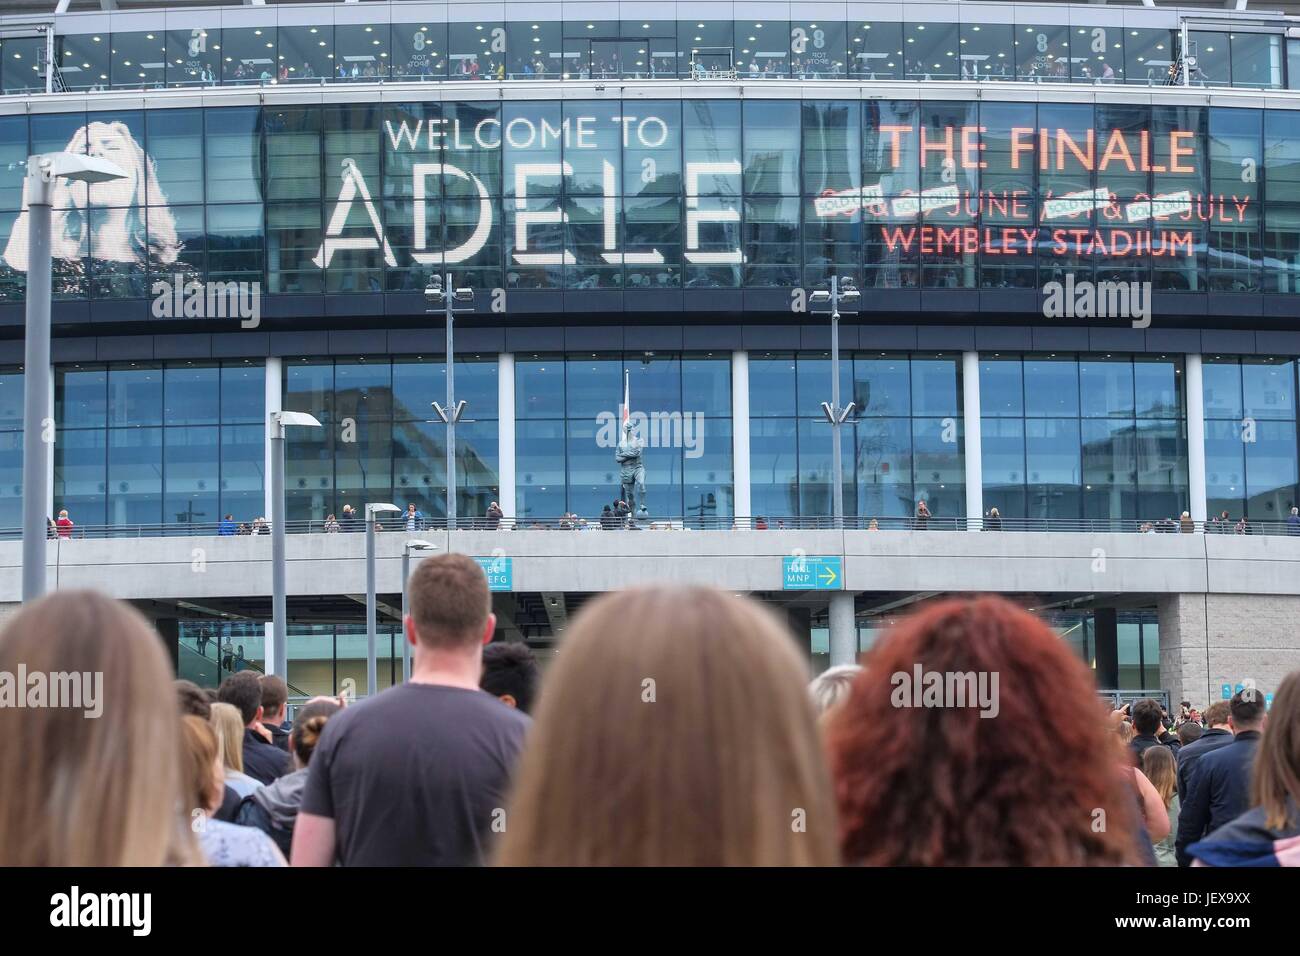 London, UK. 28th June 2017. Adele ends her world tour called The Finale with four shows at Wembley Stadium. The concerts will be the biggest in the stadiums history  with 98,000 fans attending each night. :Credit claire doherty Alamy/Live News. Stock Photo